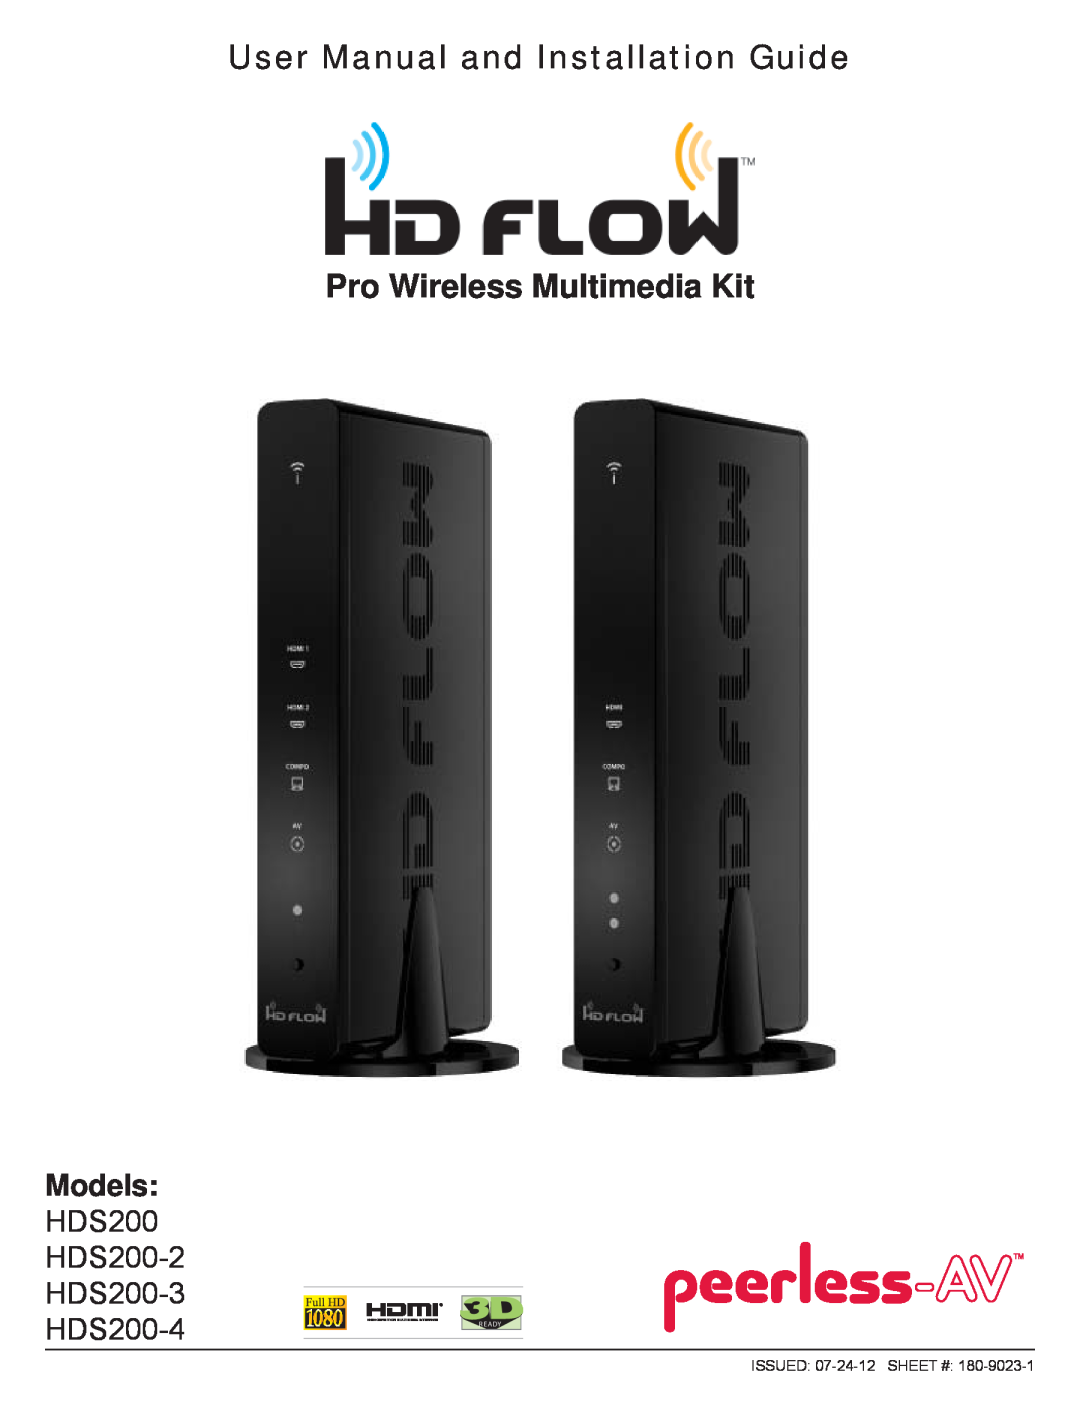 Peerless Industries HDS200 user manual Models, User Manual and Installation Guide Pro Wireless Multimedia Kit, R E Ady 